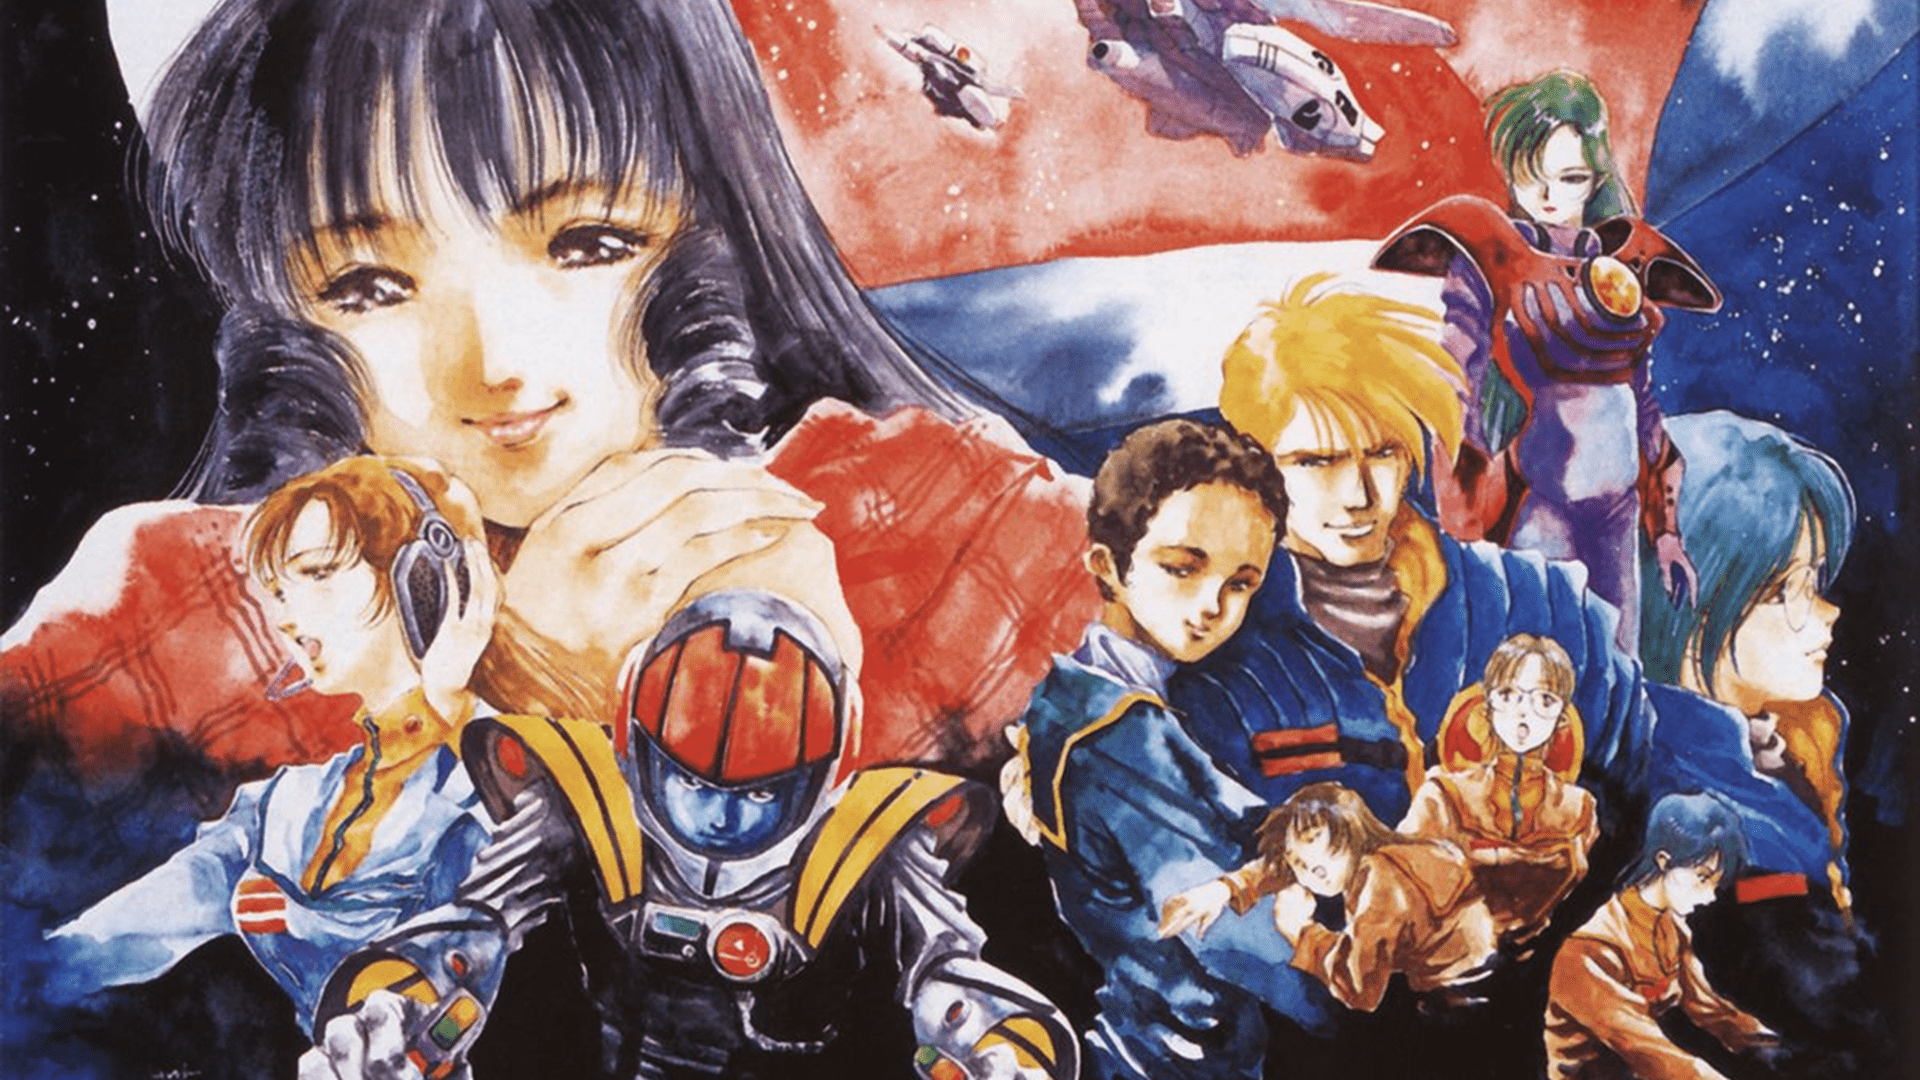 Robotech fans will love these musical Macross moments